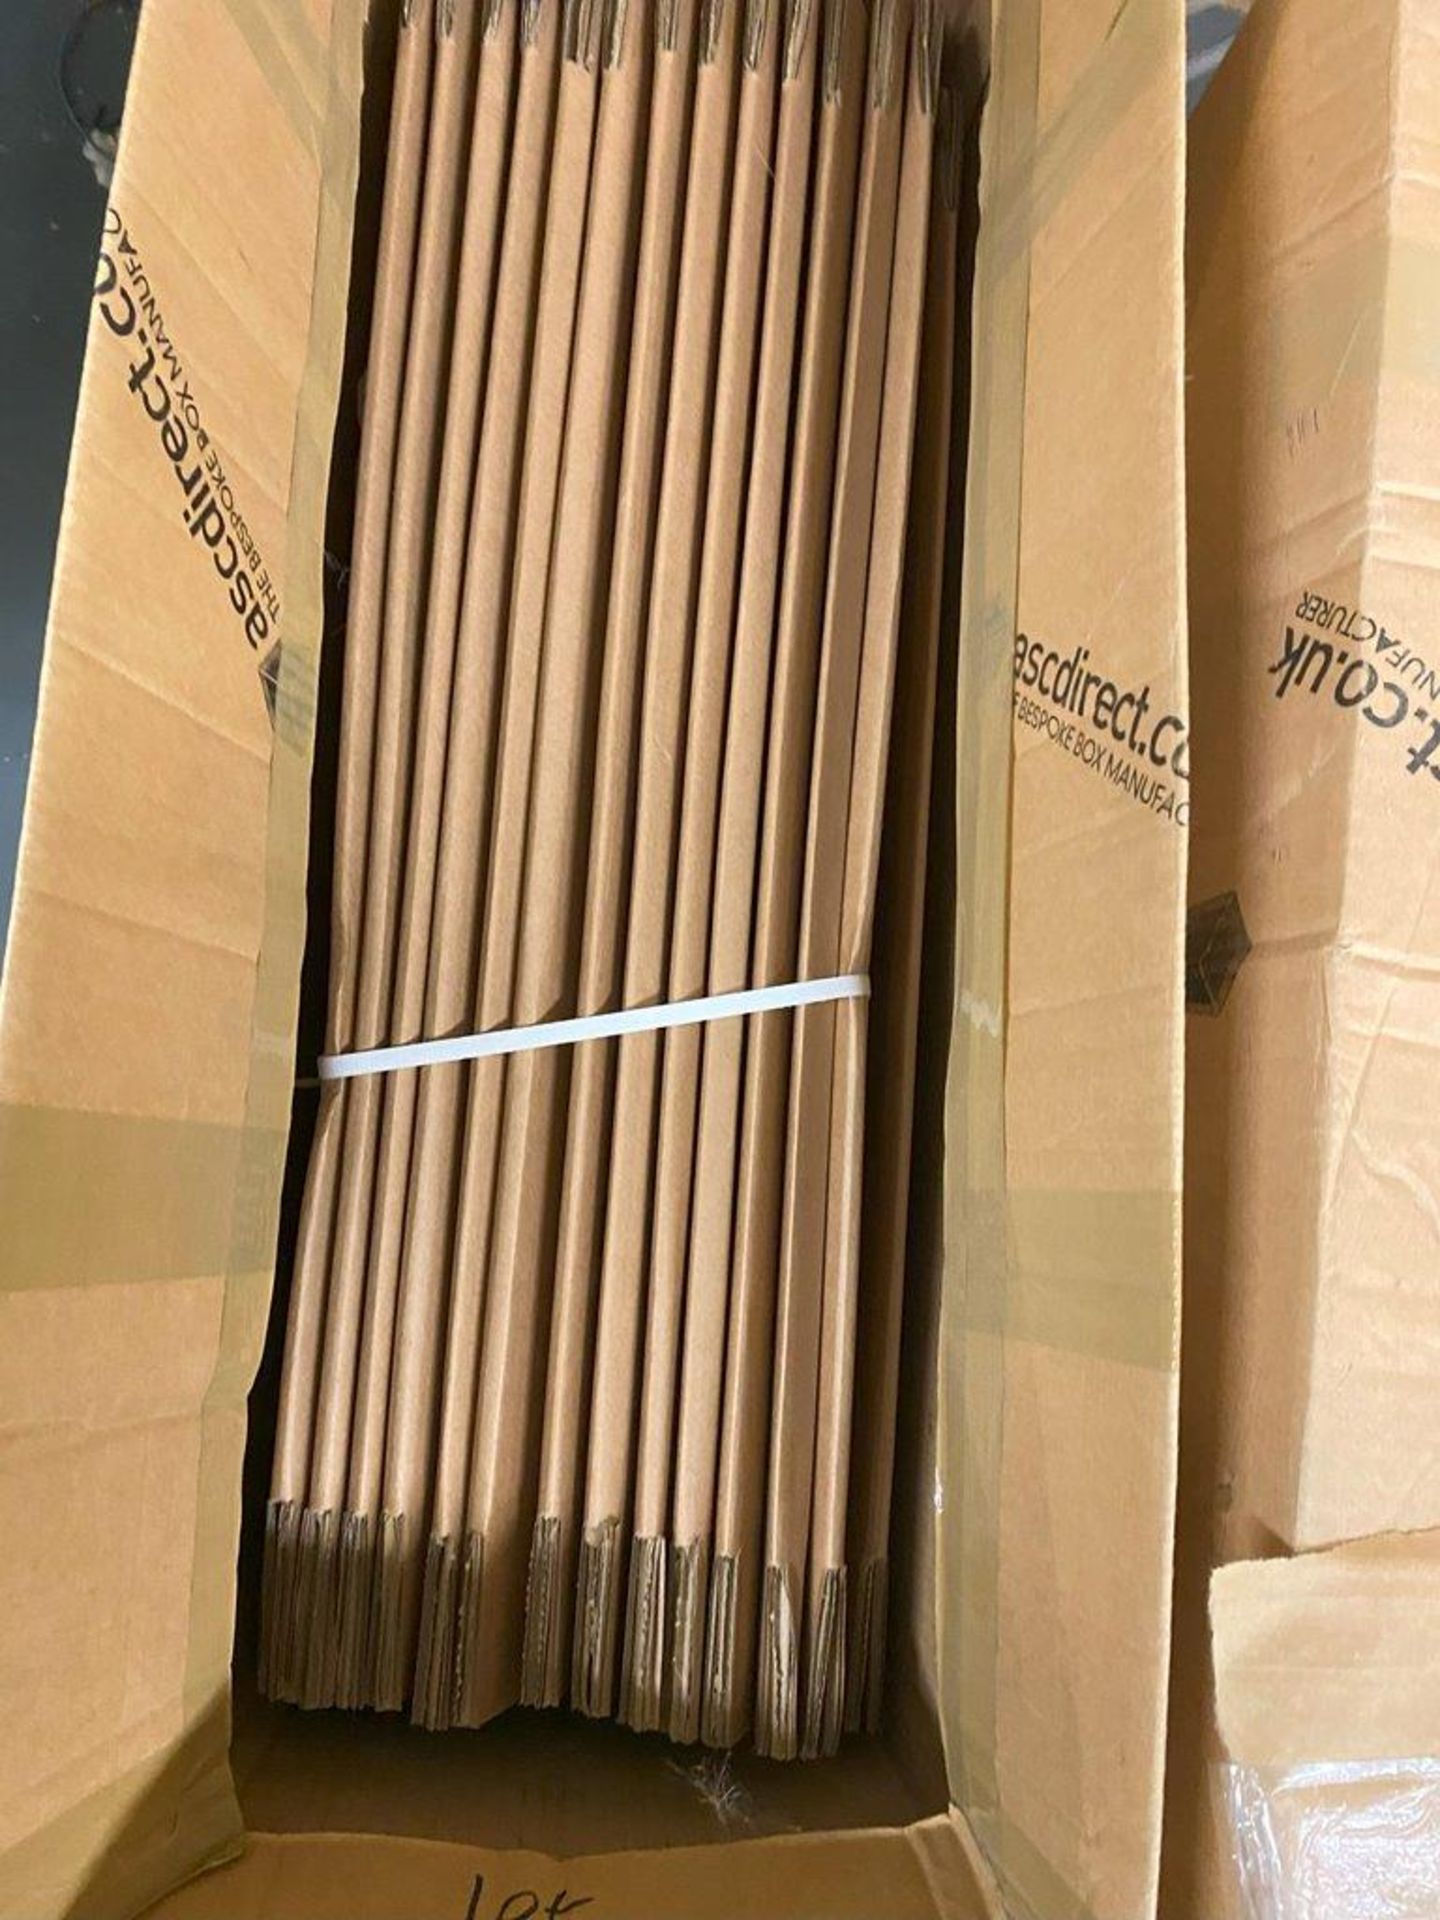 2 Boxes of approximately 40 Total 600mm (L) x 120mm (W) x 120mm (D) Cardboard Boxes and box of 25